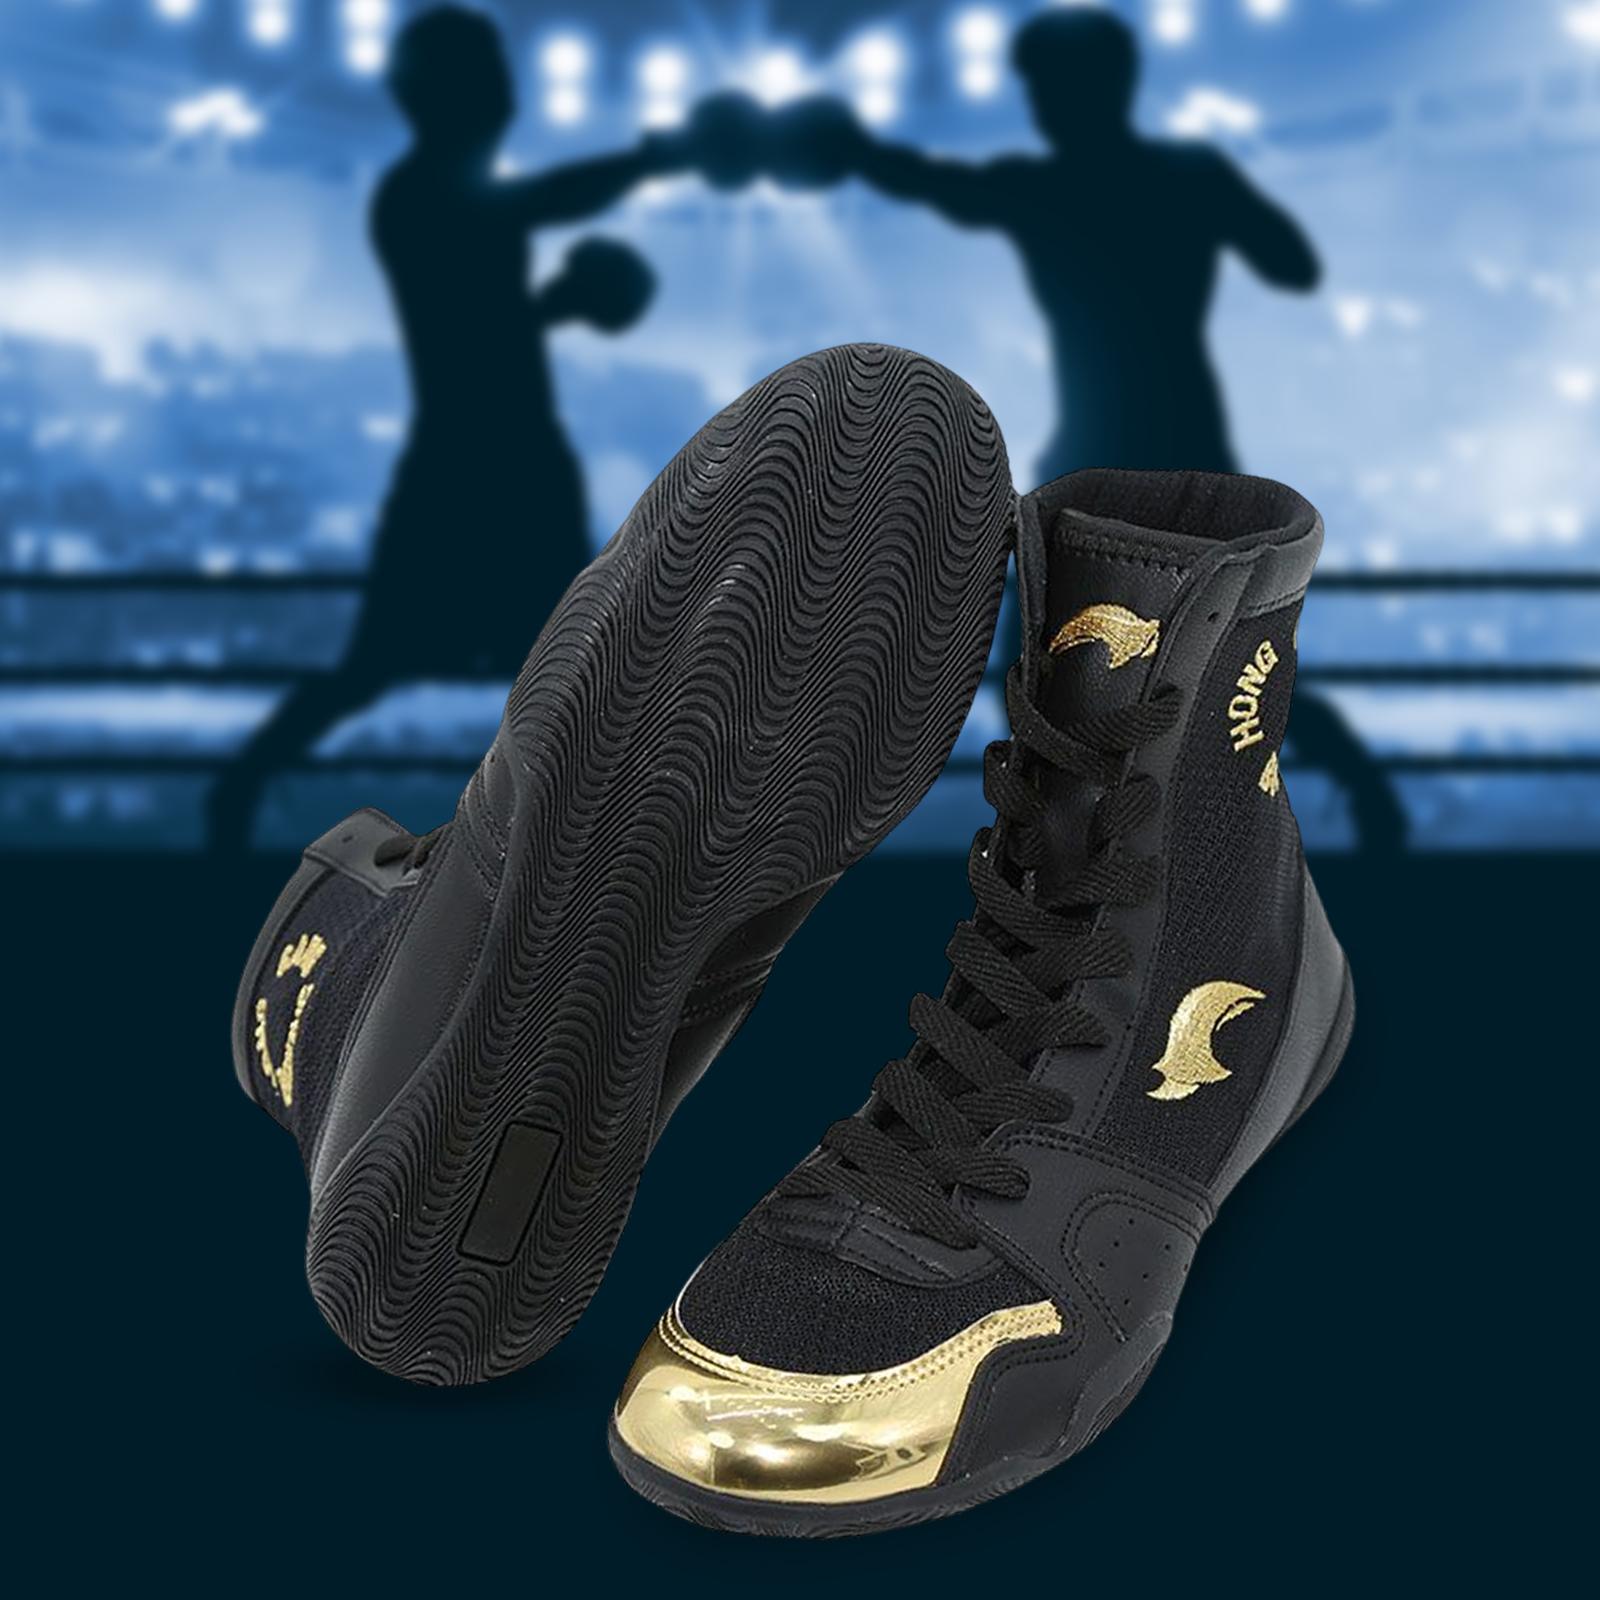 Kick Boxing Shoes Wrestling Boots Practice for Grappling Taekwondo Mma 41